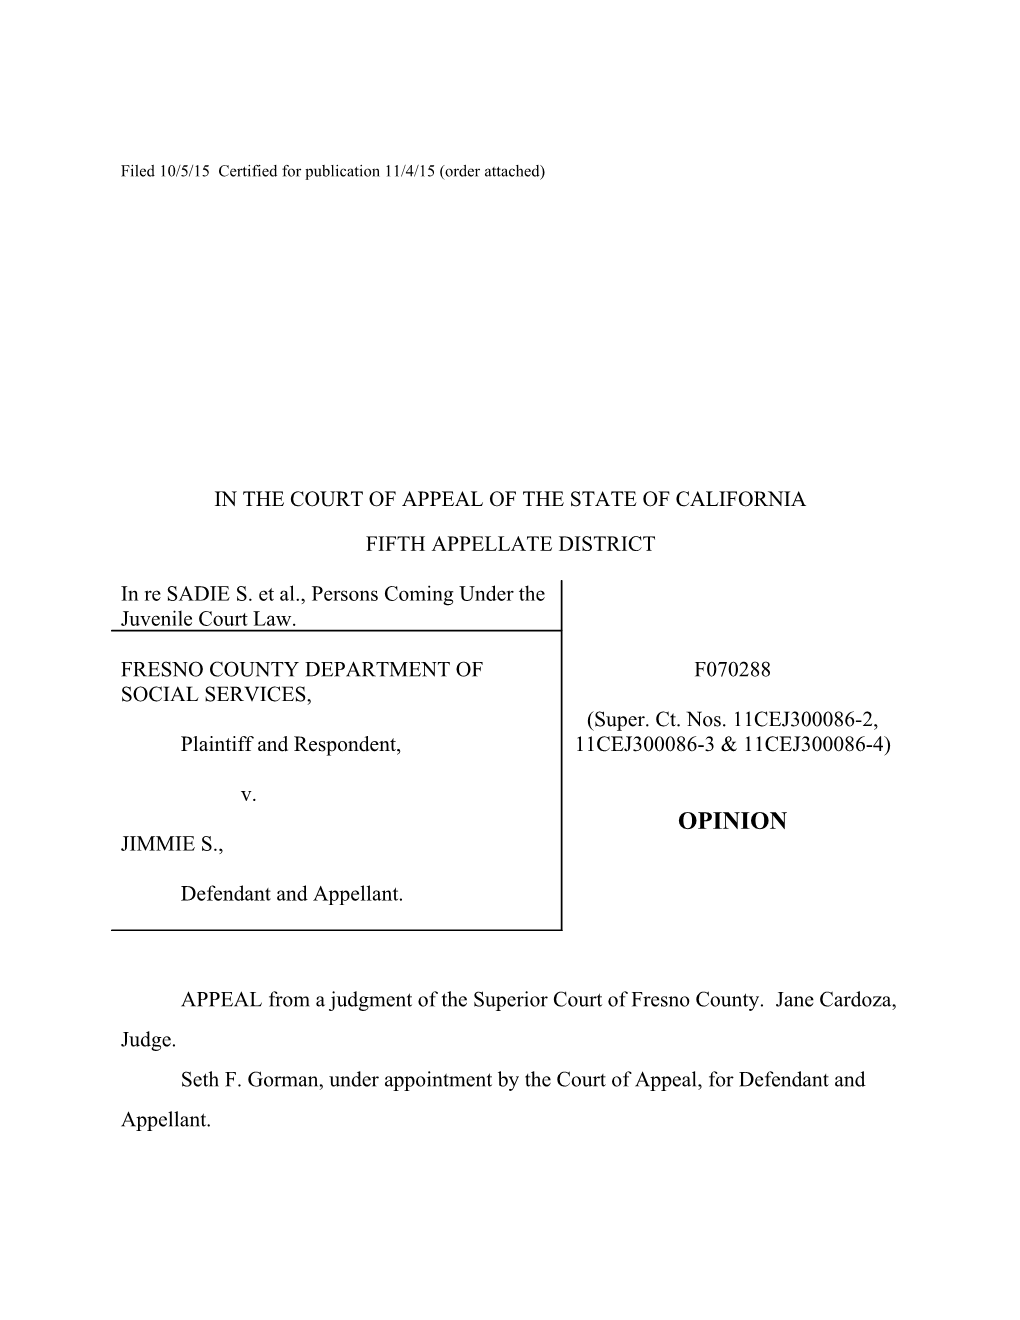 Filed 10/5/15 Certified for Publication 11/4/15 (Order Attached)